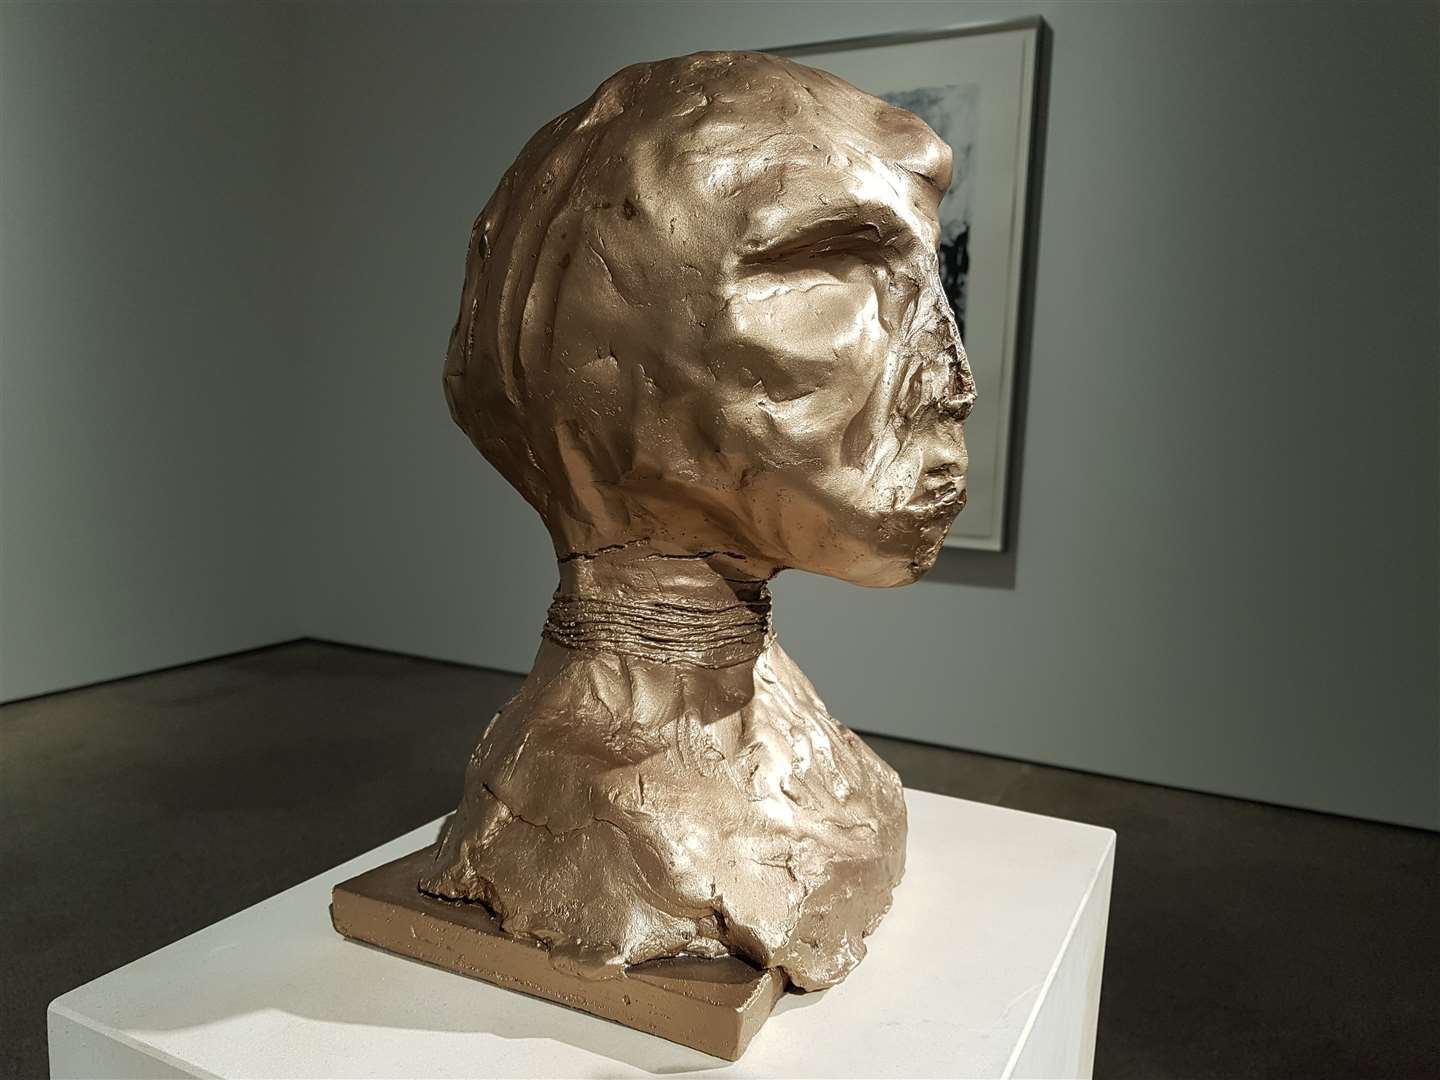 Tracey Emin's bronze busts provide the only splashes of colour to the exhibition